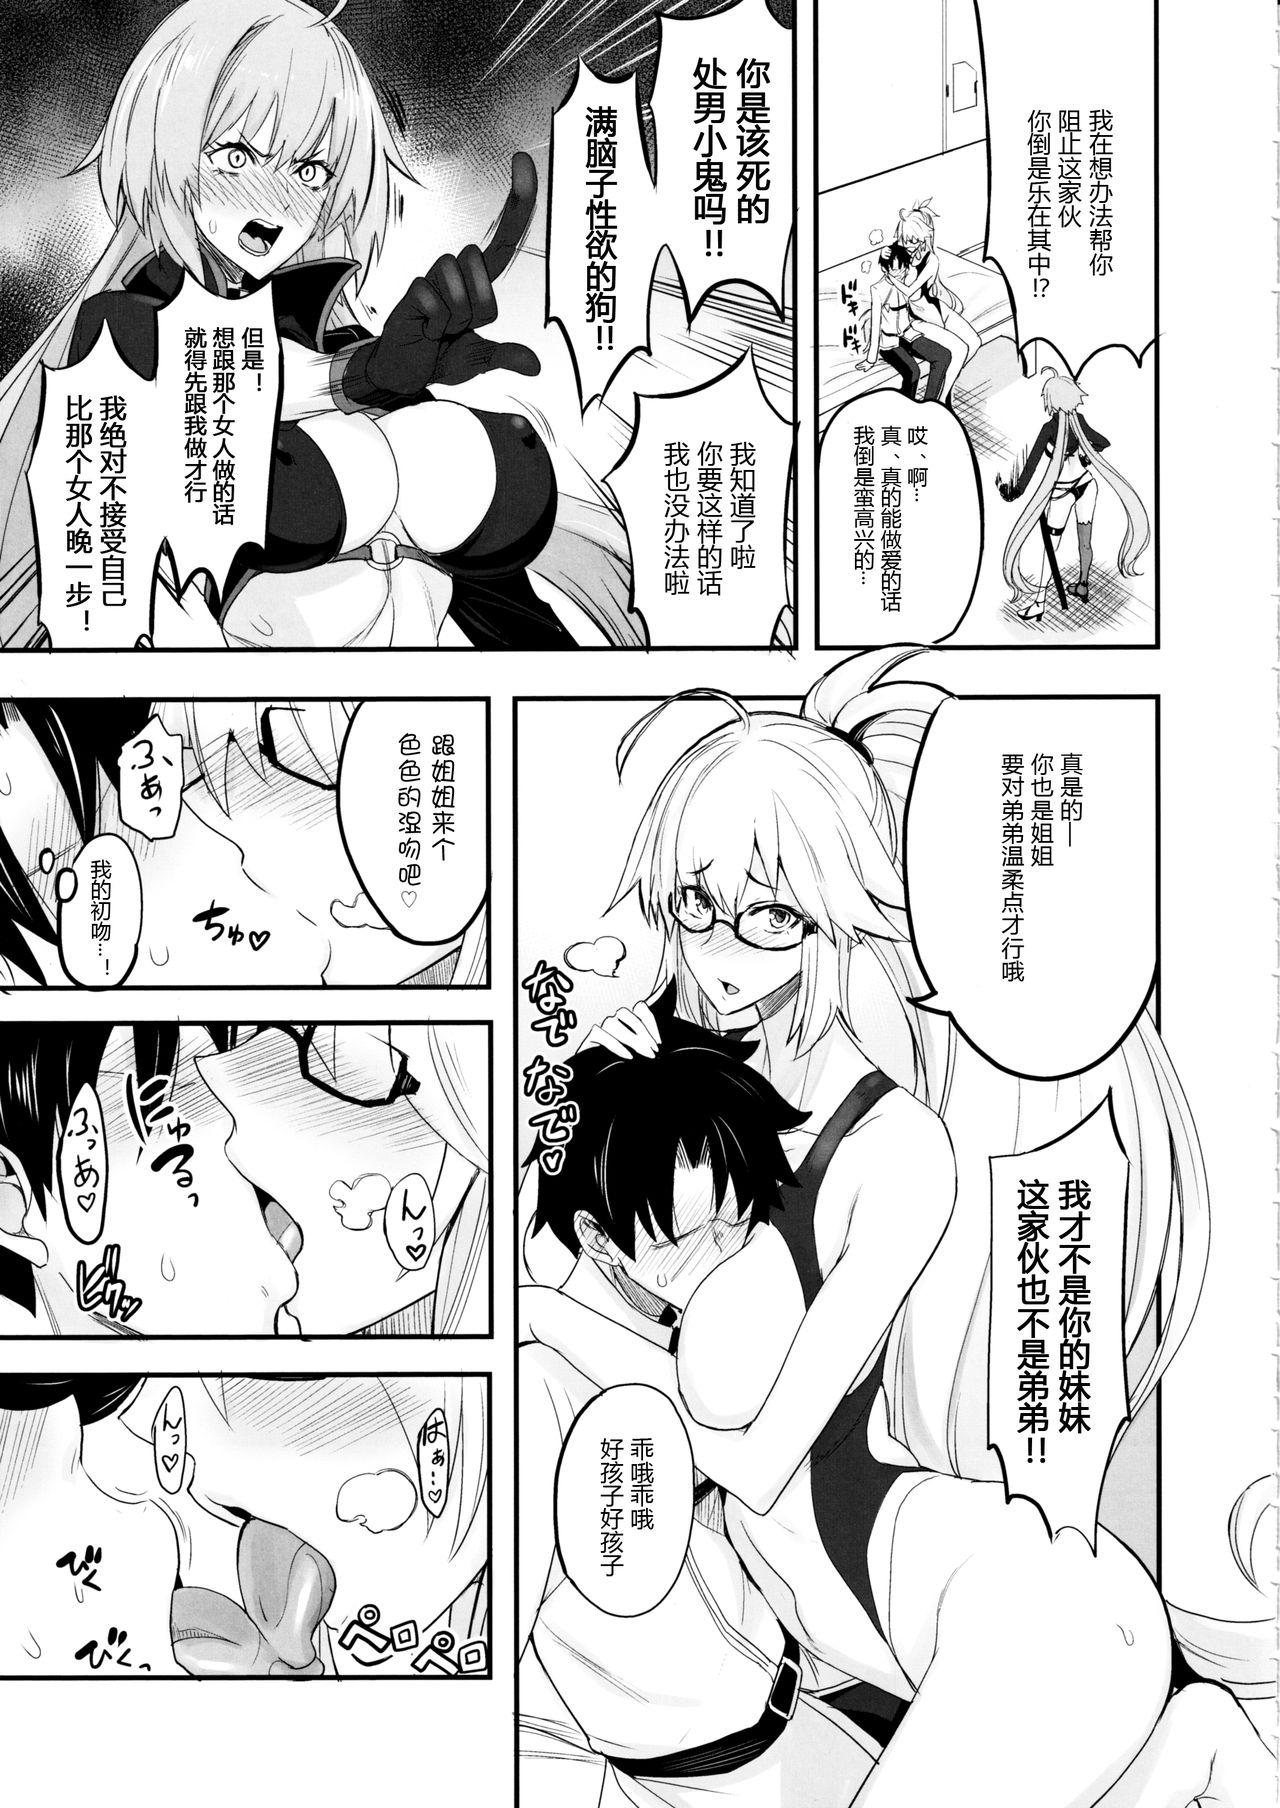 Butt Sex W Jeanne vs Master - Fate grand order Deflowered - Page 5